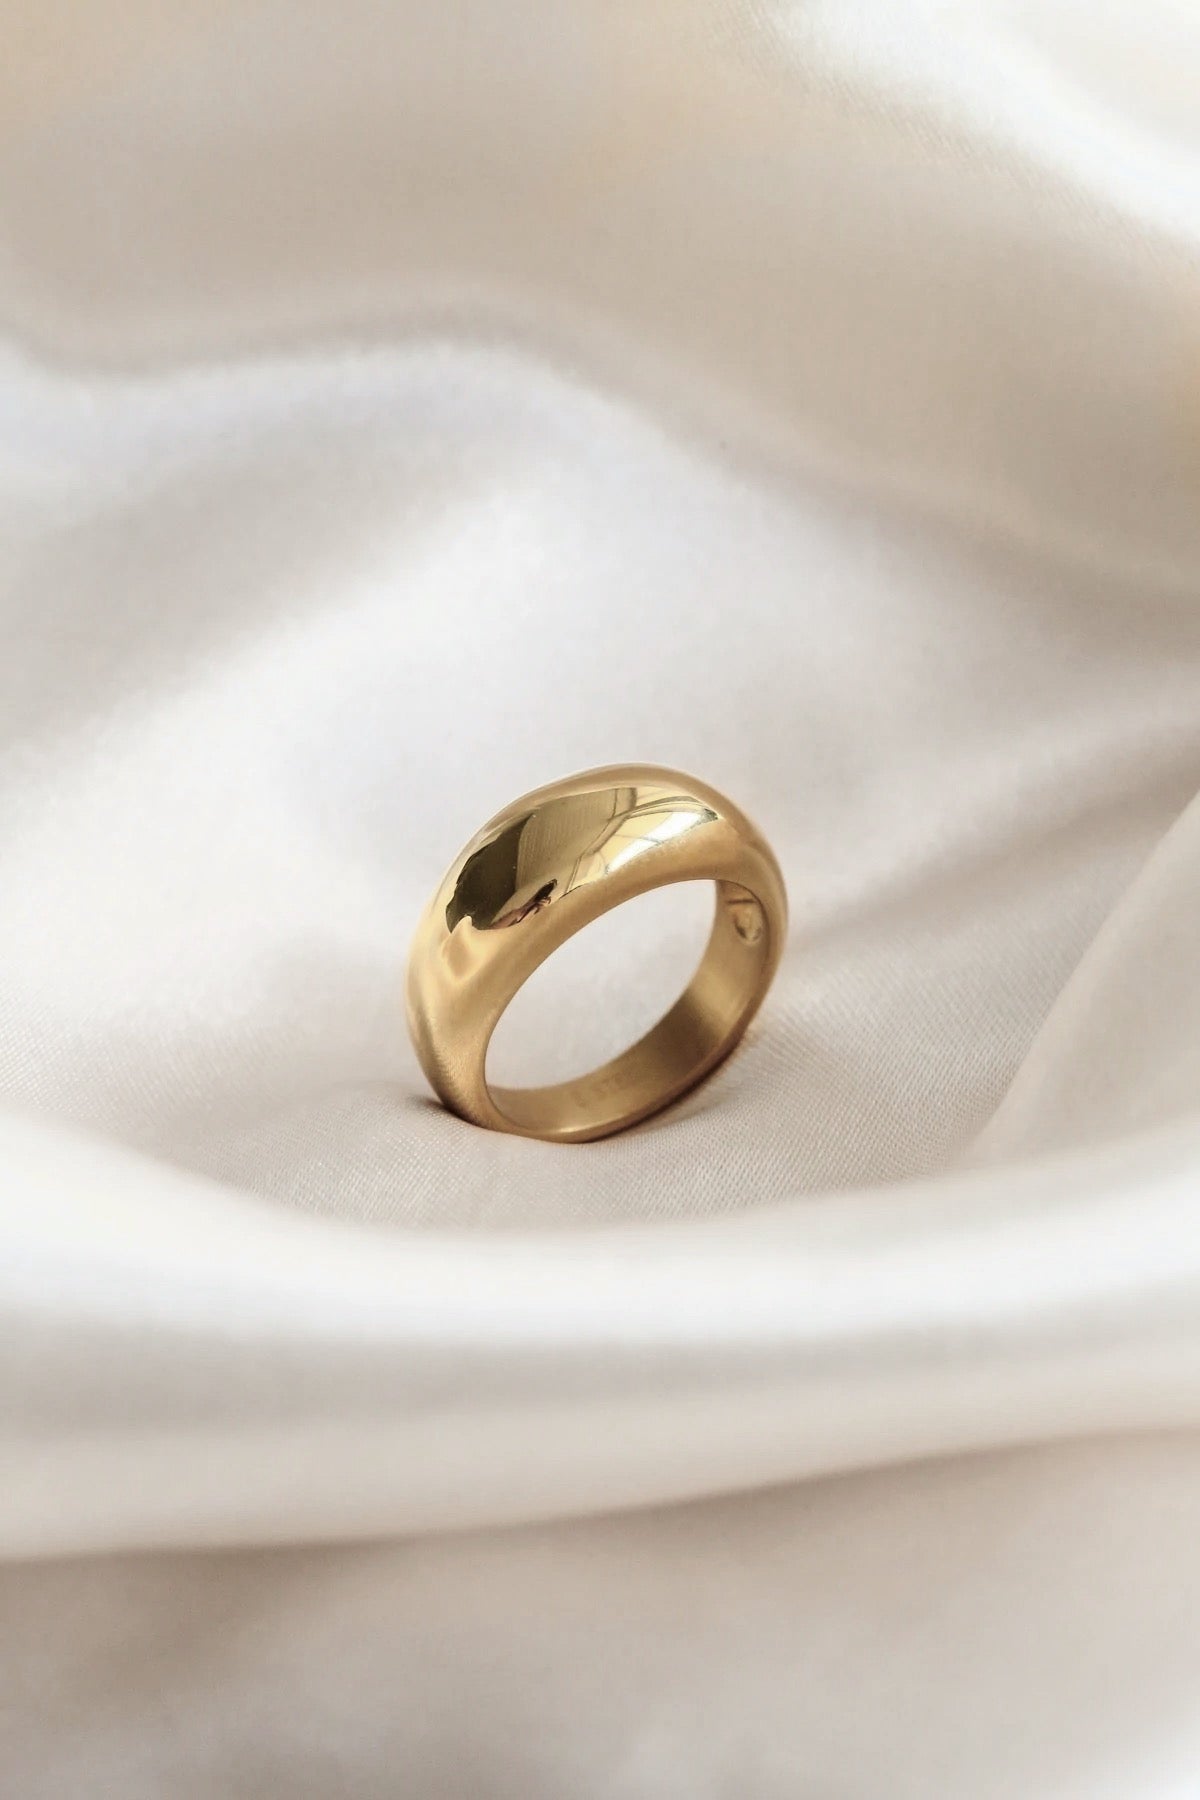 Gloss Ring - Boutique Minimaliste has waterproof, durable, elegant and vintage inspired jewelry